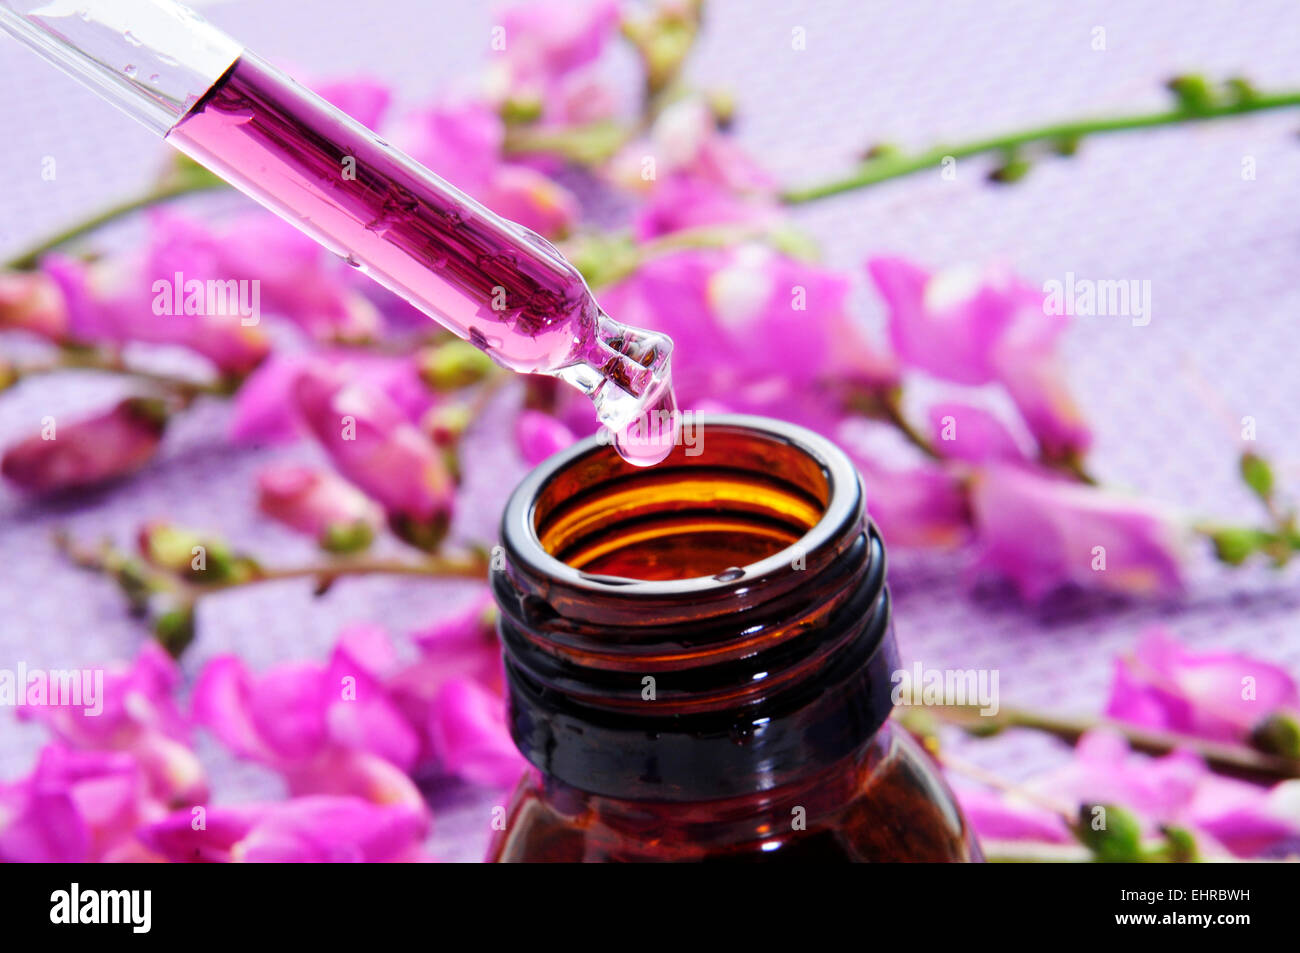 closeup of a dropper bottle and a pile of purple flowers on a purple background Stock Photo